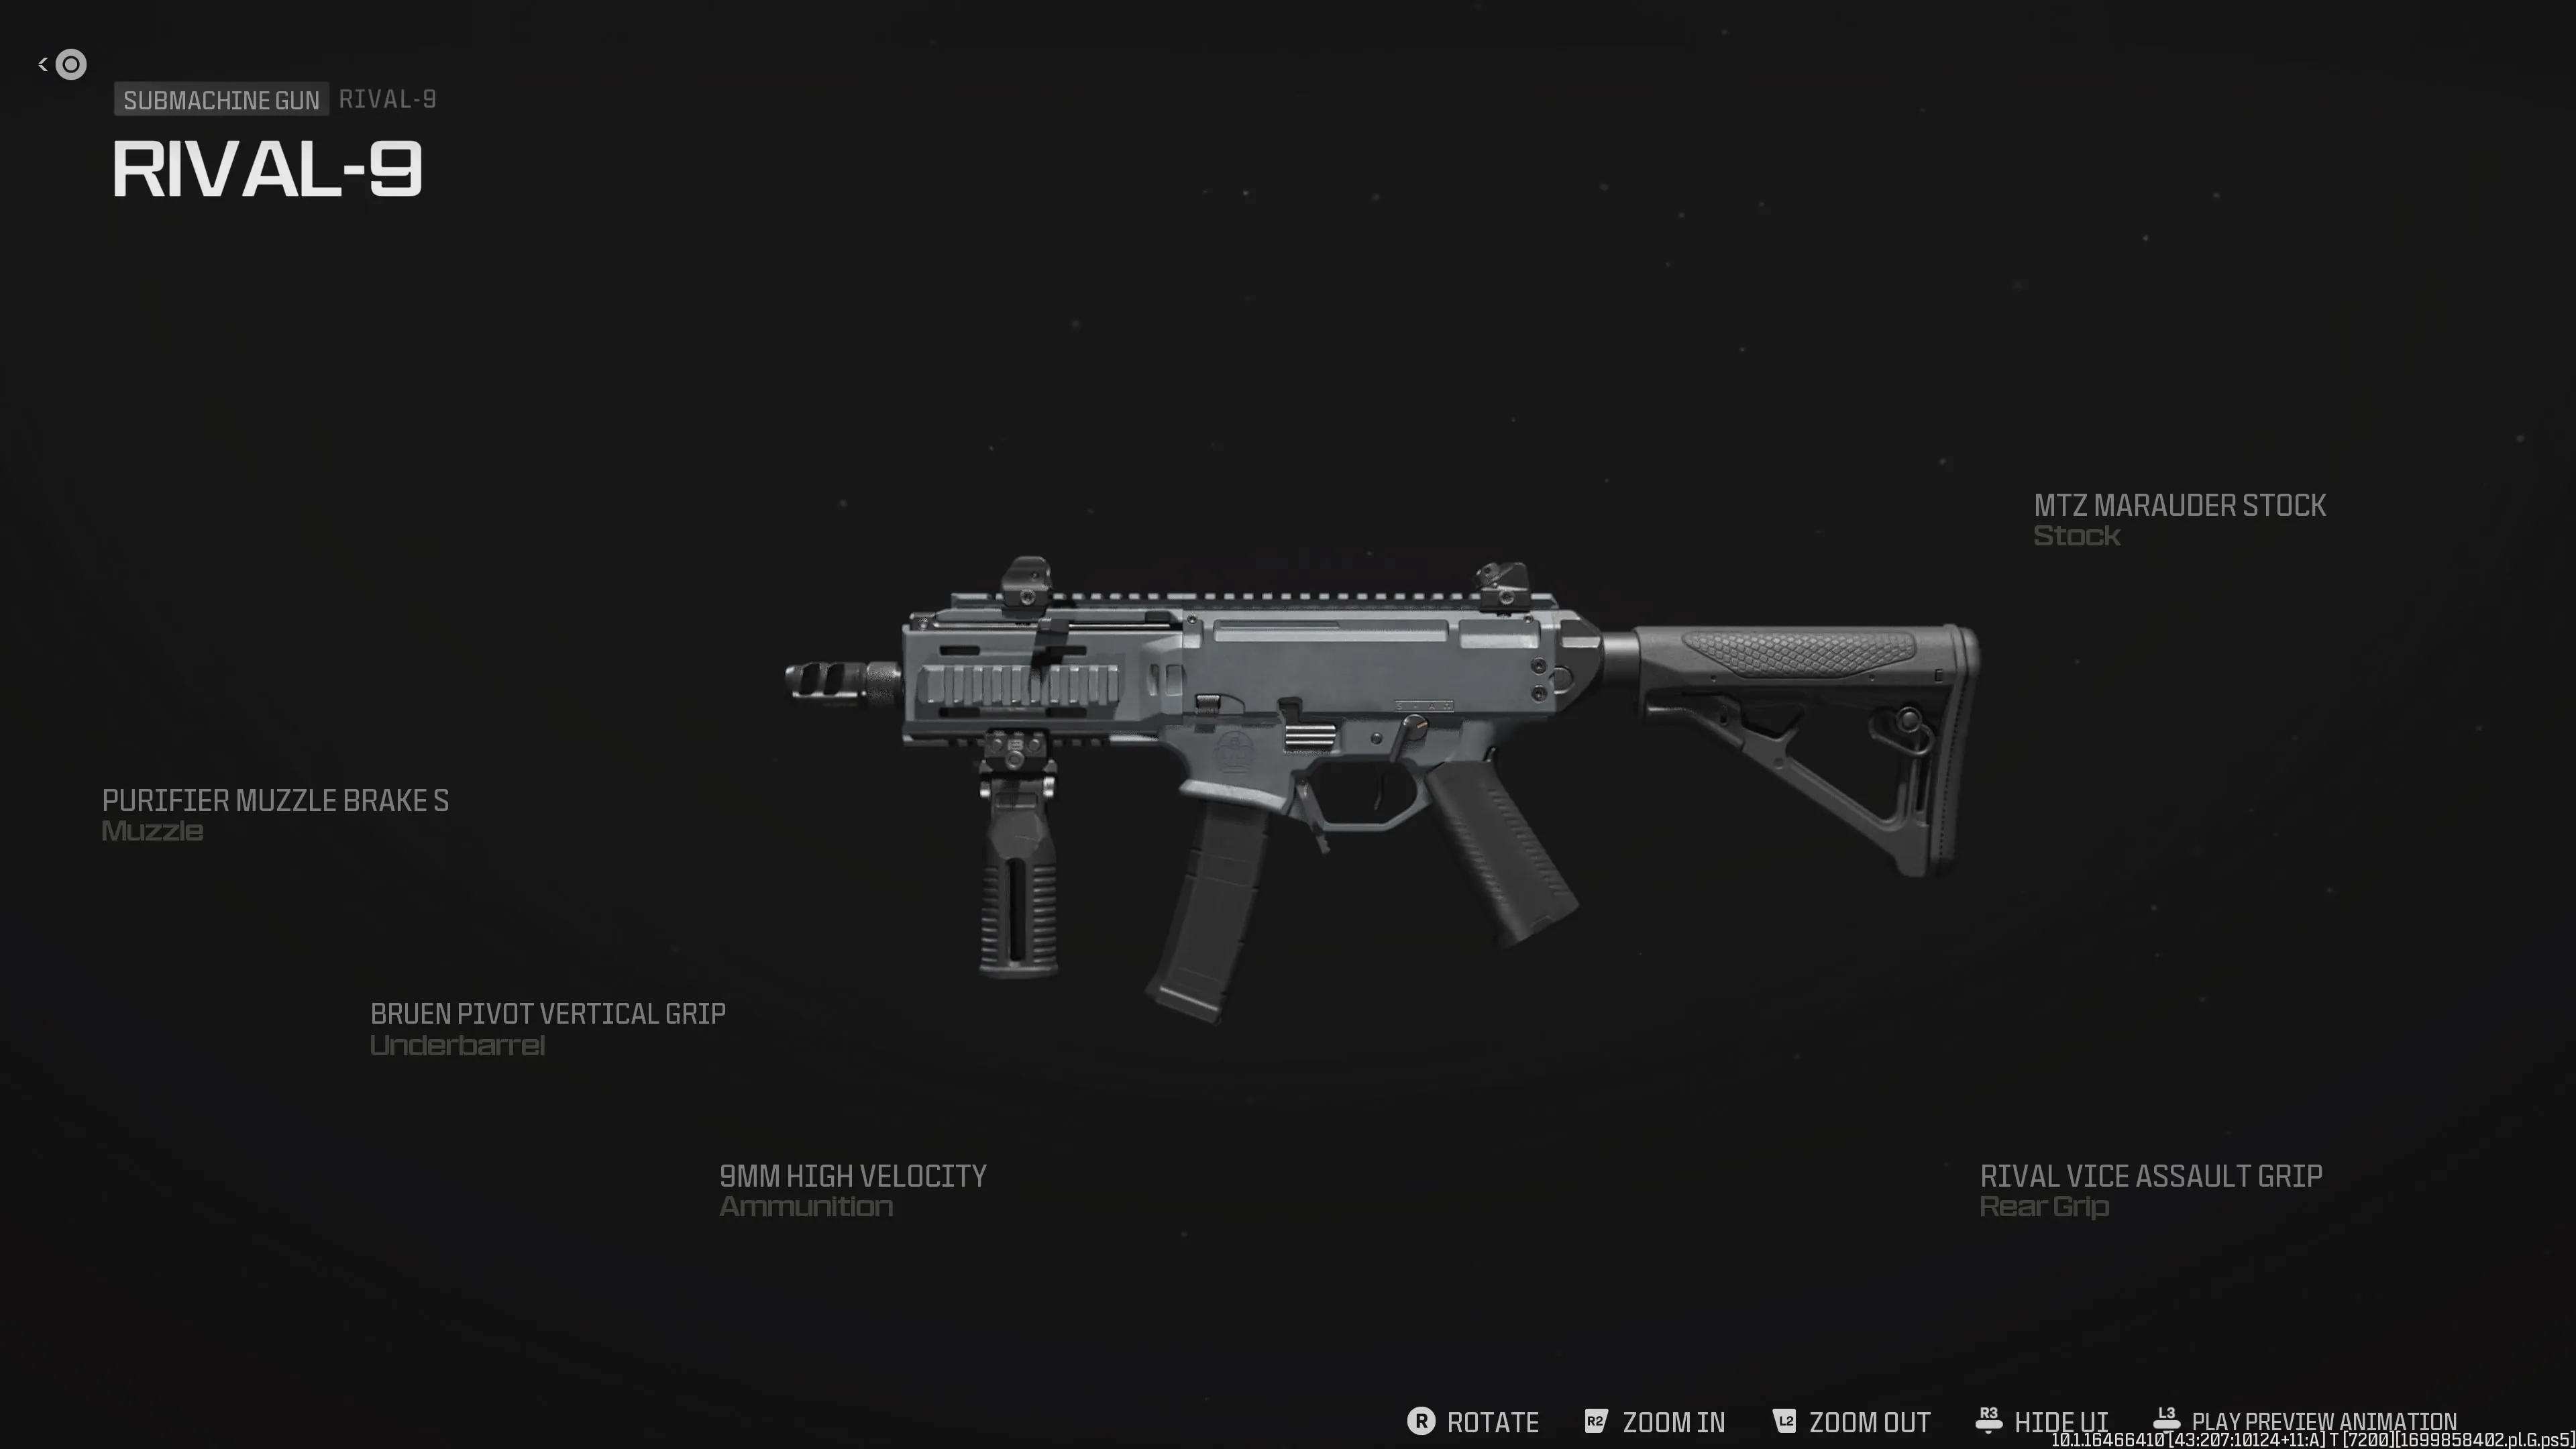 Got mw yesterday wanna know what's the meta and thing to know : r/ modernwarfare